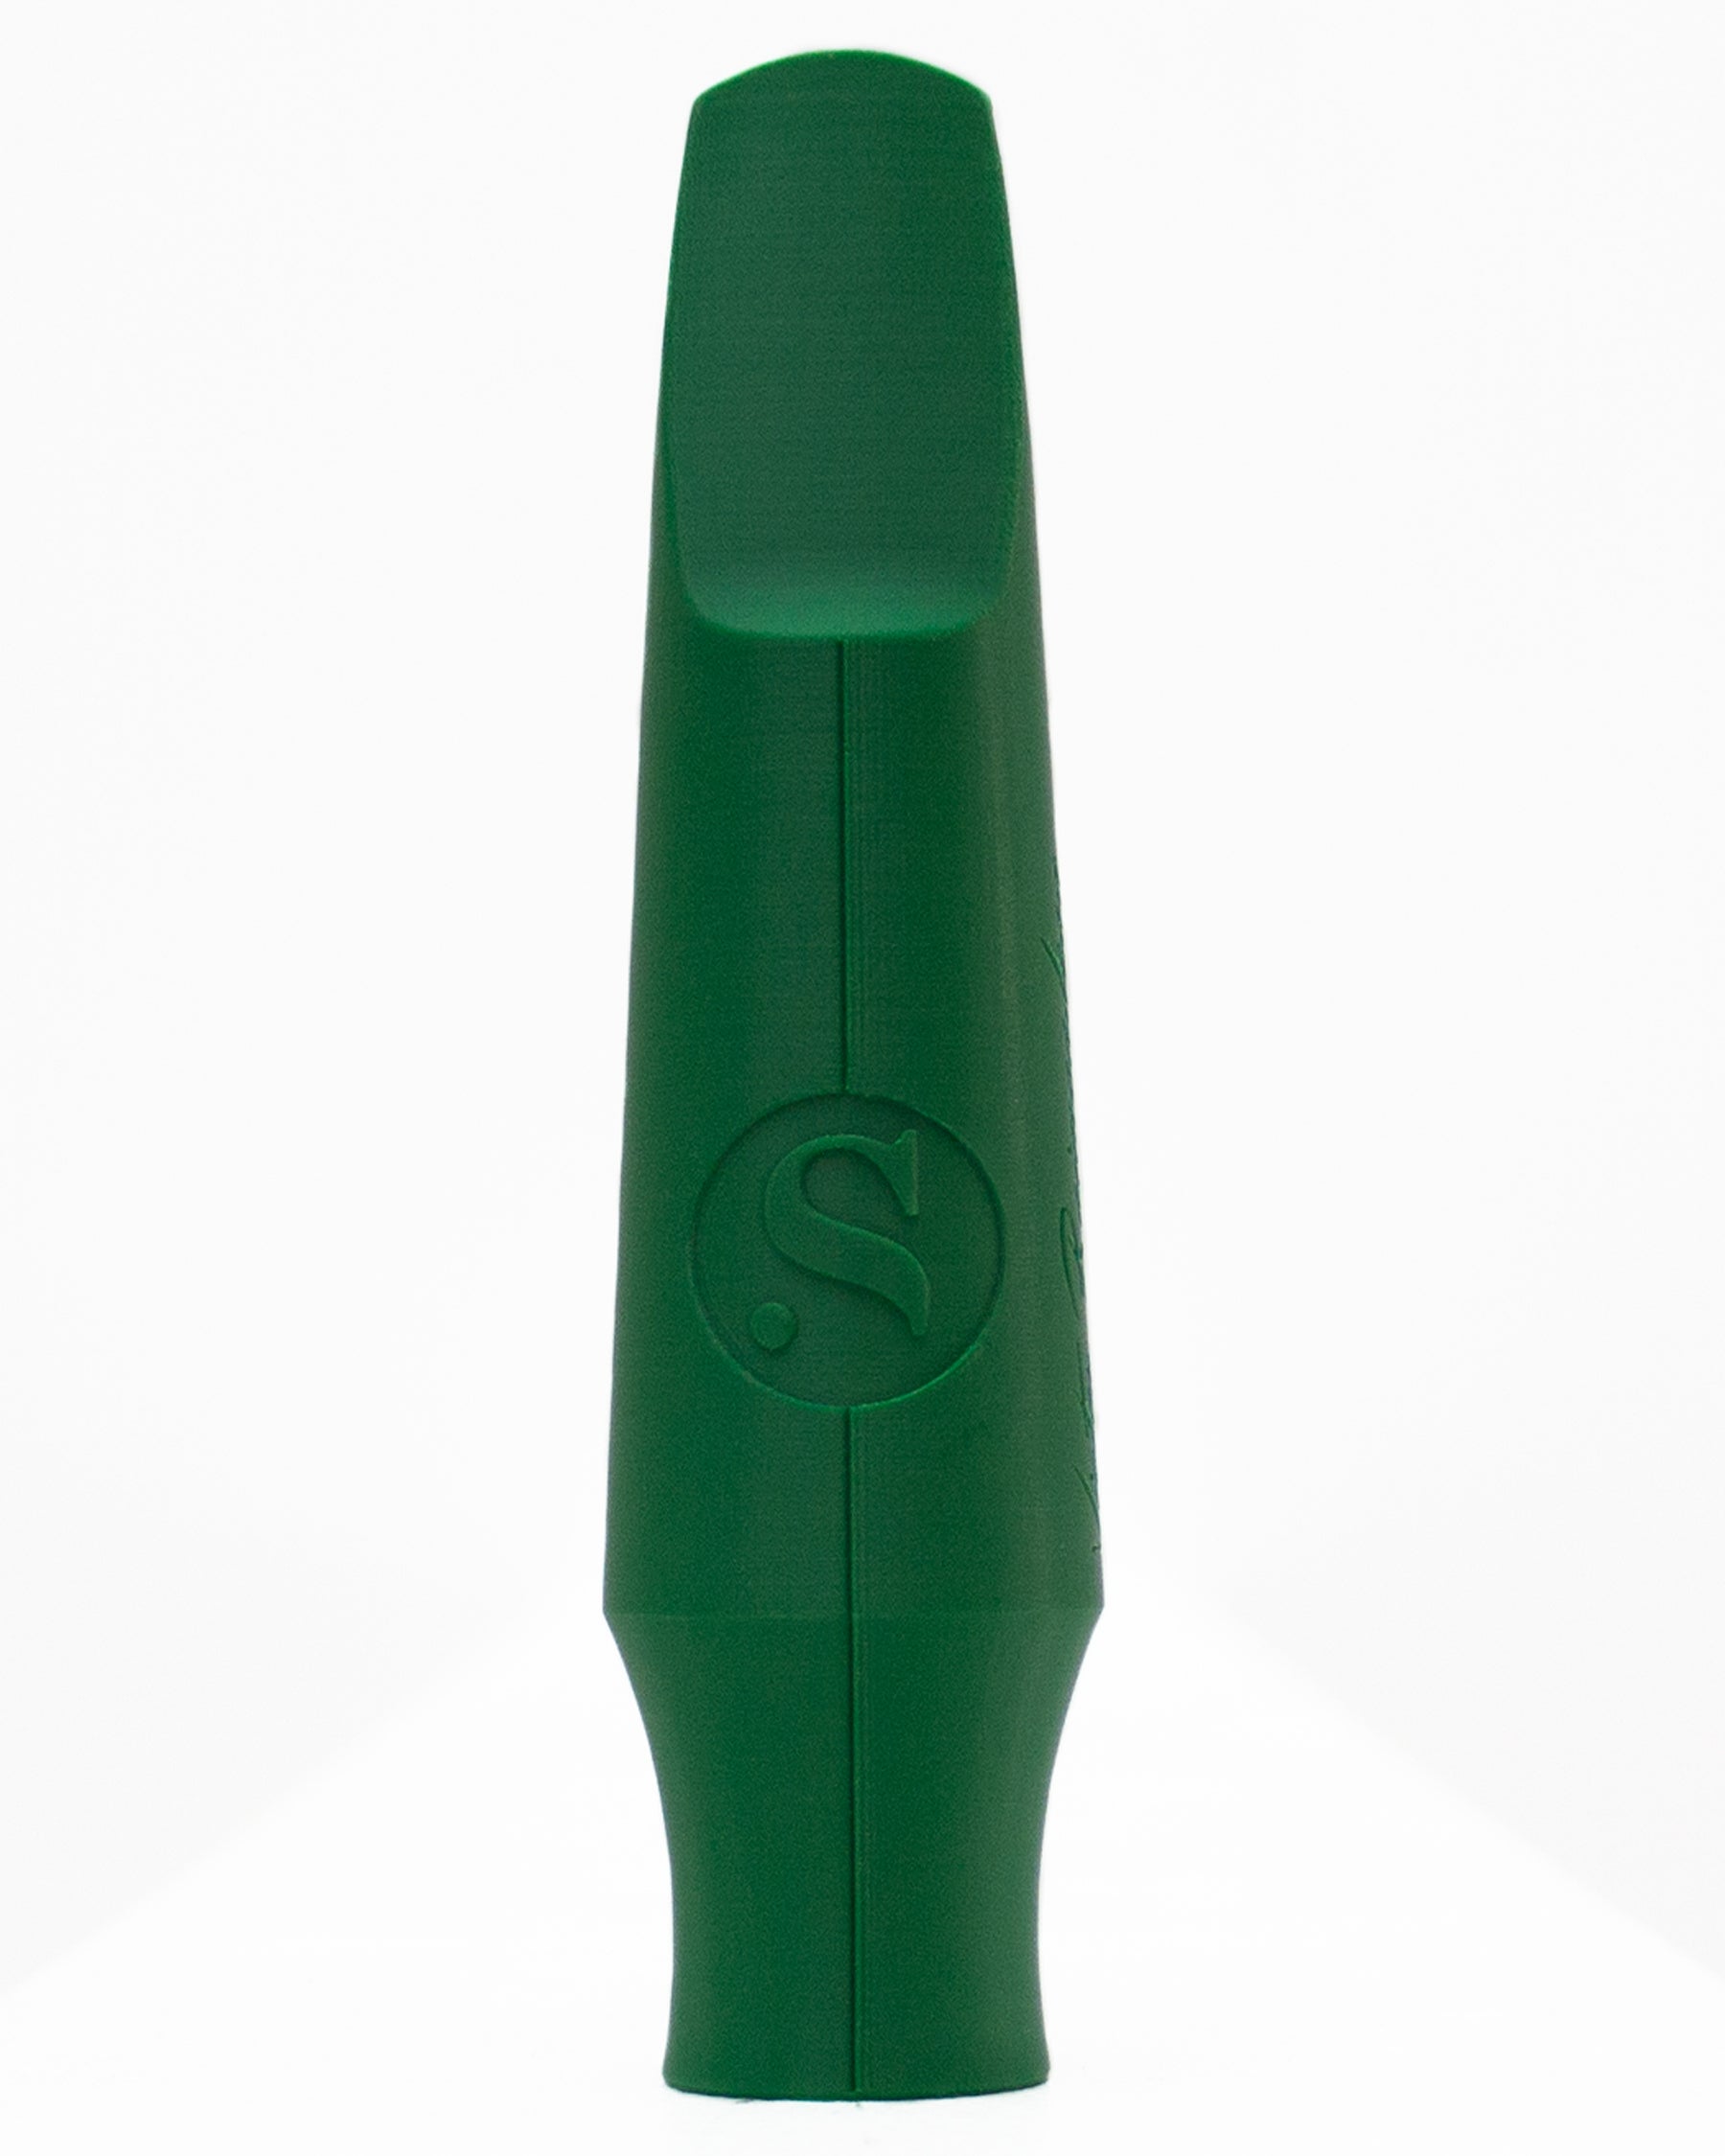 Baritone Originals Saxophone mouthpiece - Smoky by Syos - 8 / Forest Green